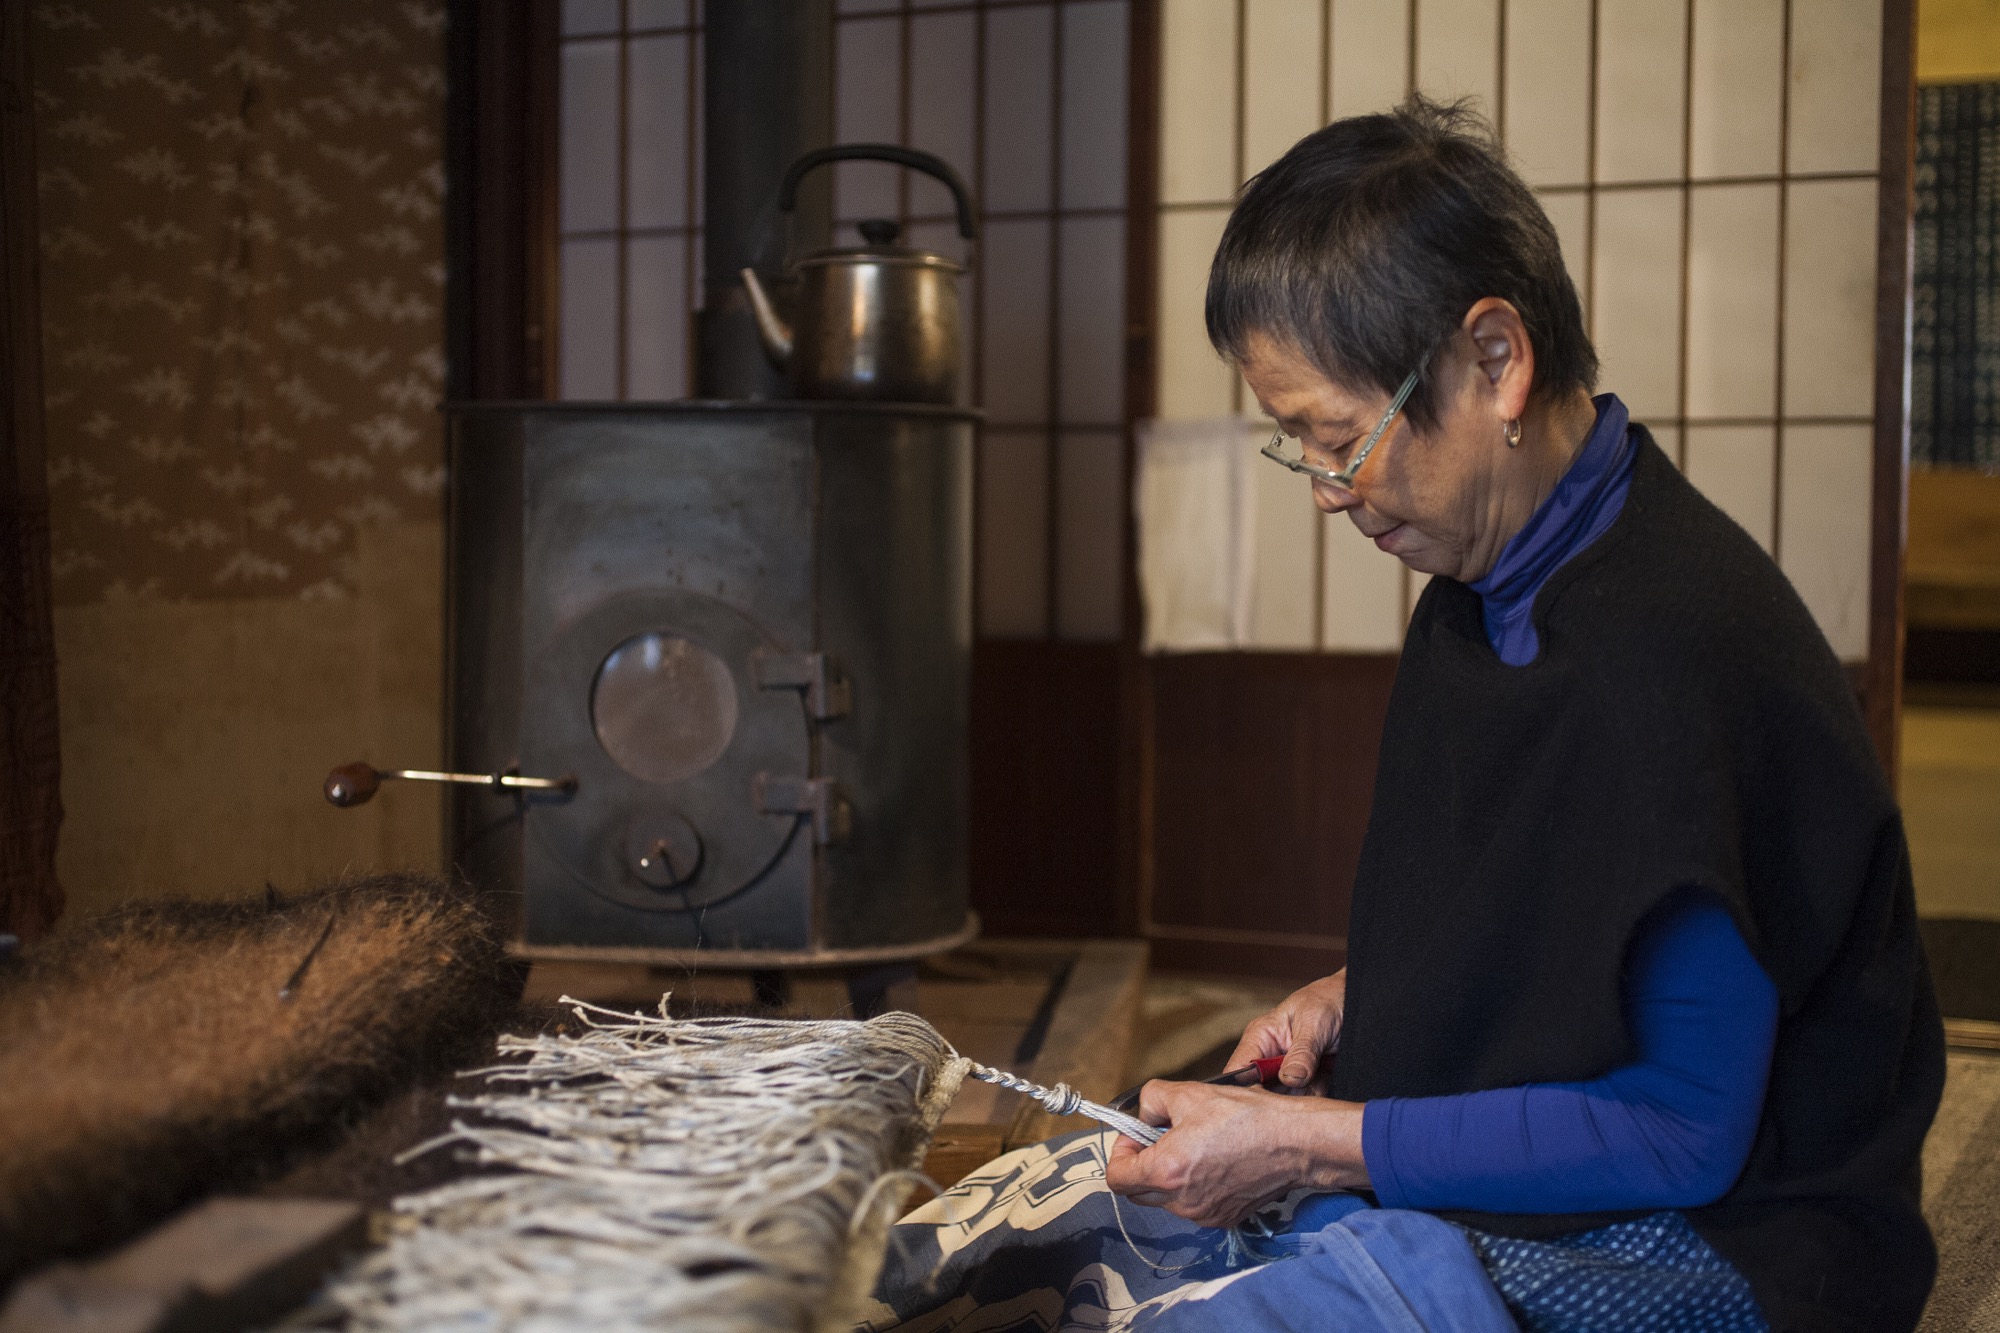 Seki finds creativity in daily life as she weaves rugs from goat hair / Photo by Jimmy Cohrssen